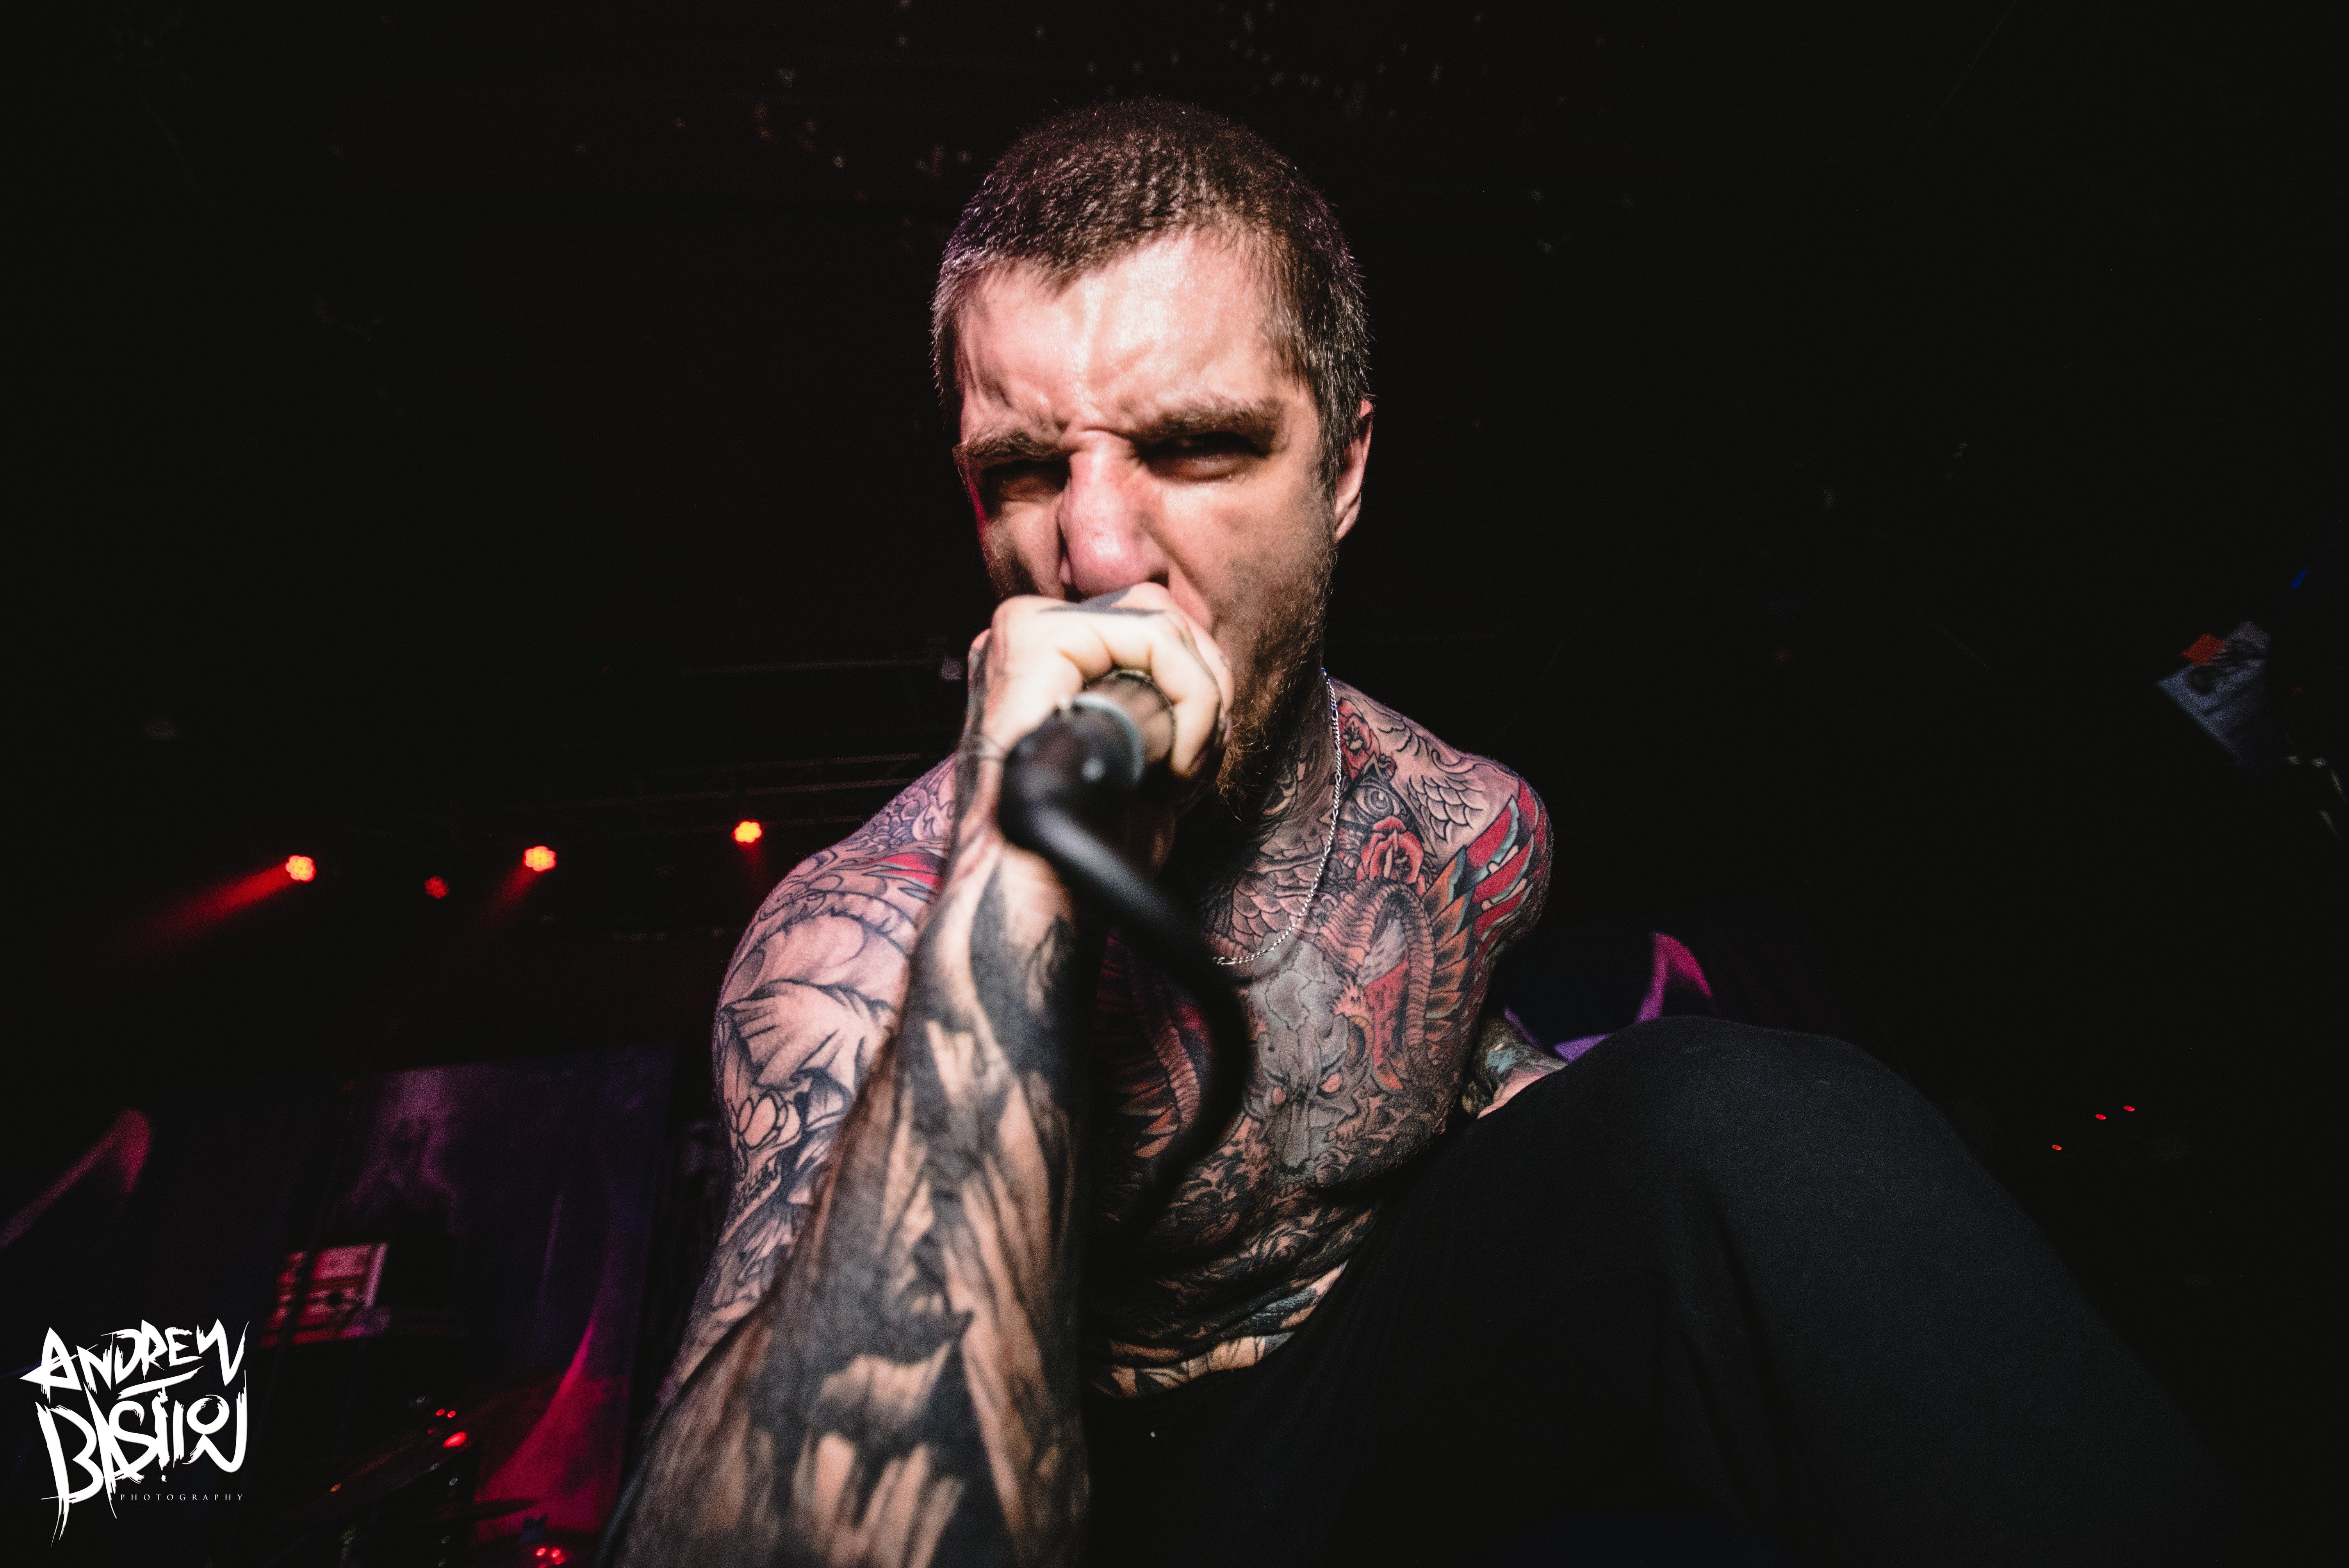 Interview with Alex Terrible of Slaughter to Prevail. The heavy